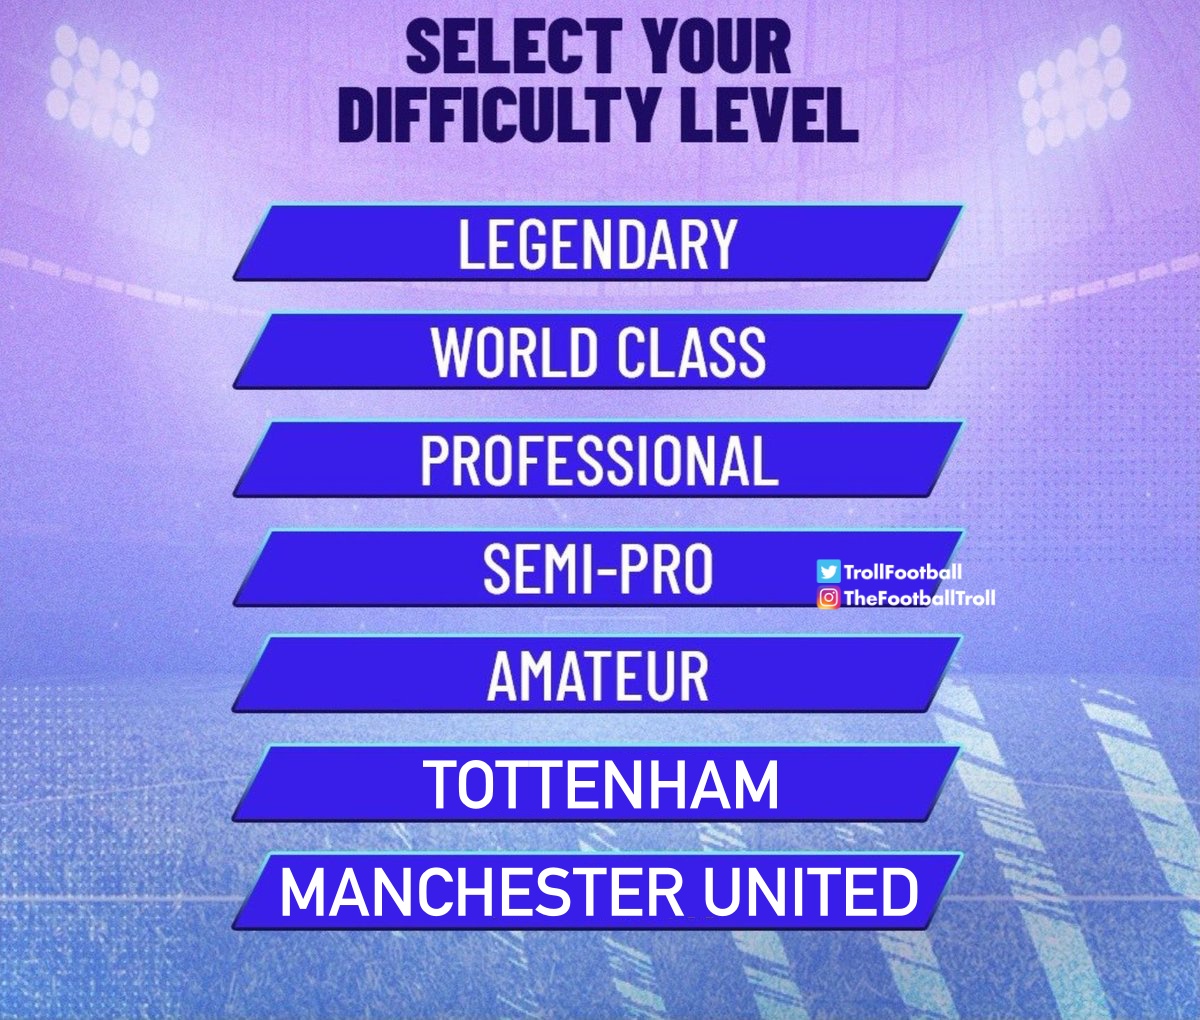 Difficulty levels in FIFA has been updated